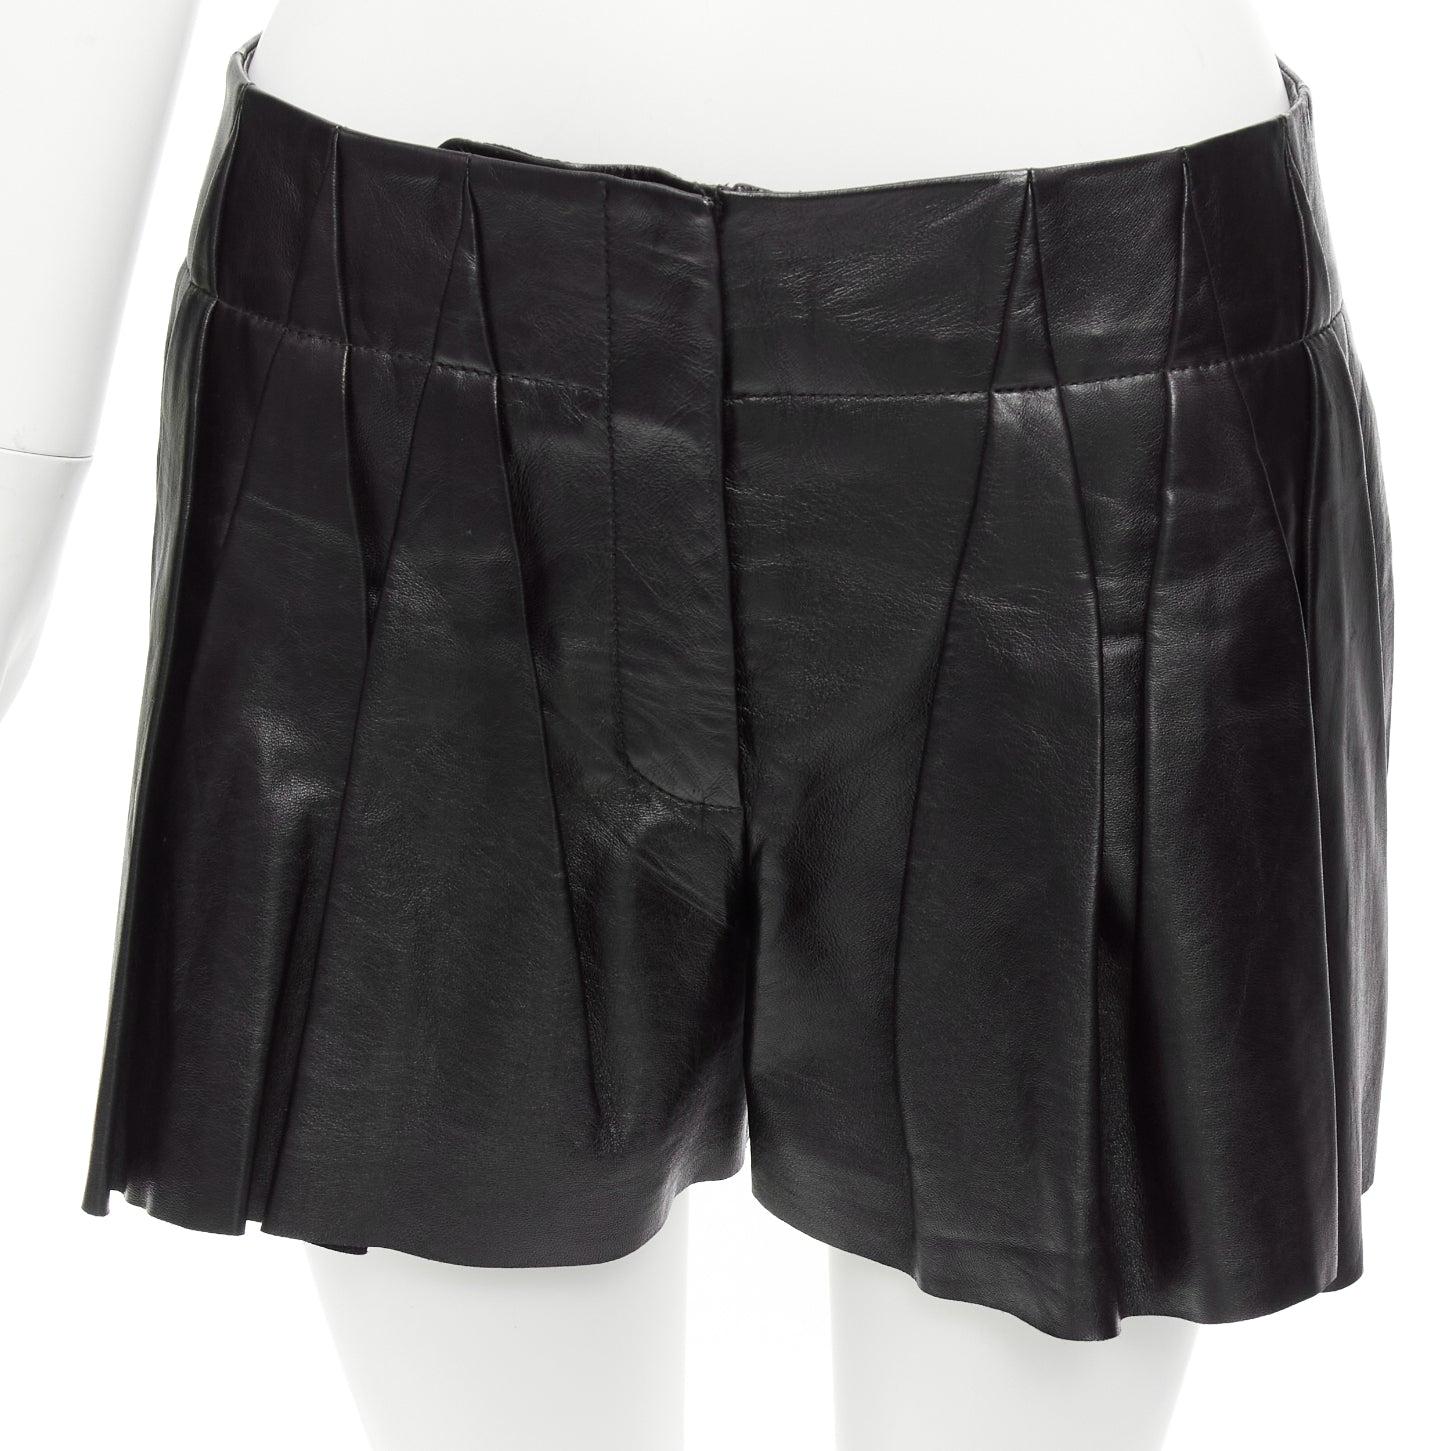 ALEXANDER WANG black lambskin leather pleated front shorts US2 S
Reference: NKLL/A00217
Brand: Alexander Wang
Designer: Alexander Wang
Material: Leather
Color: Black
Pattern: Solid
Closure: Zip Fly
Lining: Black Fabric
Made in: